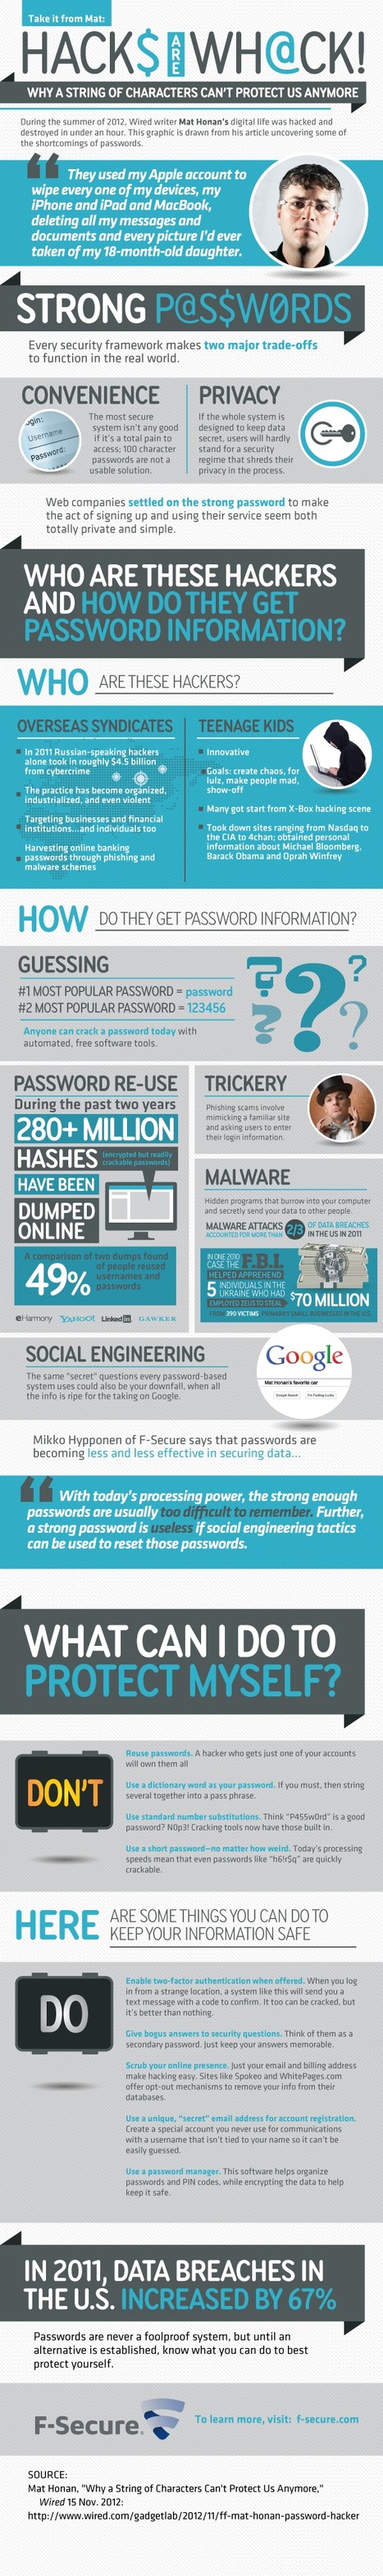 Hacking lessons learned: how to cover your digital ass [Infographic] | 21st Century Learning and Teaching | Scoop.it